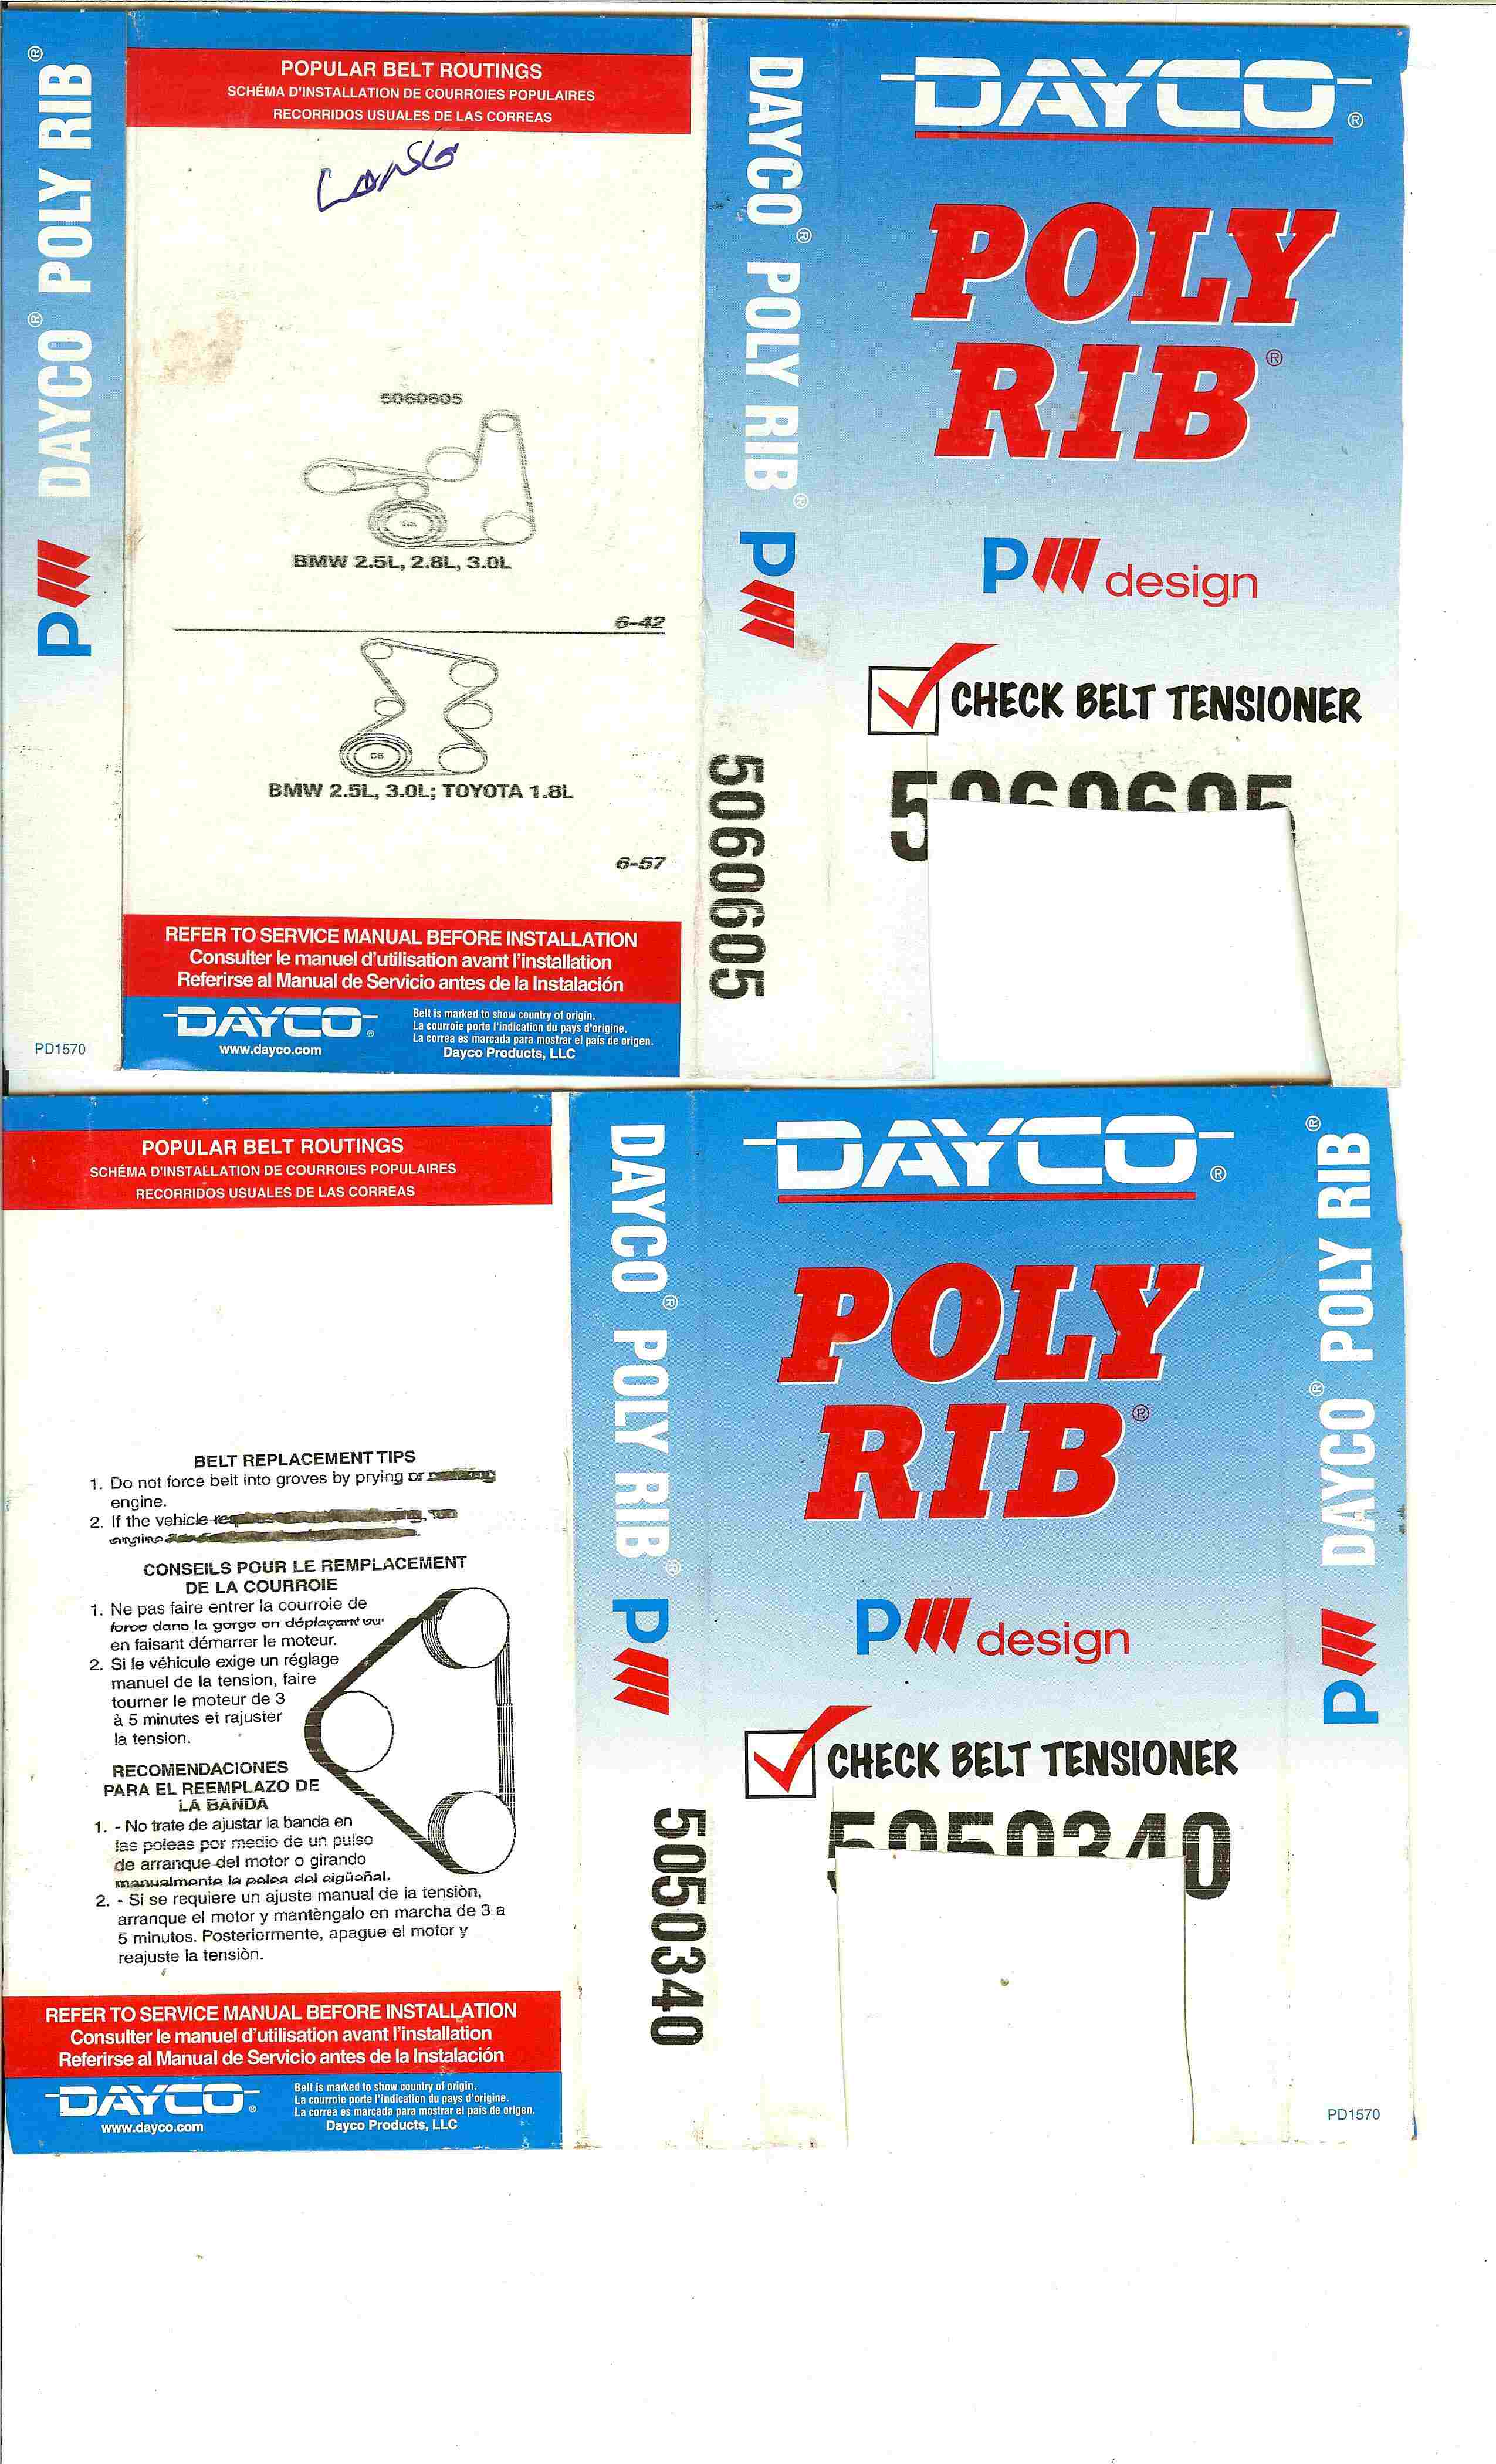 Dayco Fan belt packages from Autozone clearly showing where I cutout the UPC's and sent all materials documents, etc.. to the 4myreabte.com for the rebate rules along with everything requested, with p